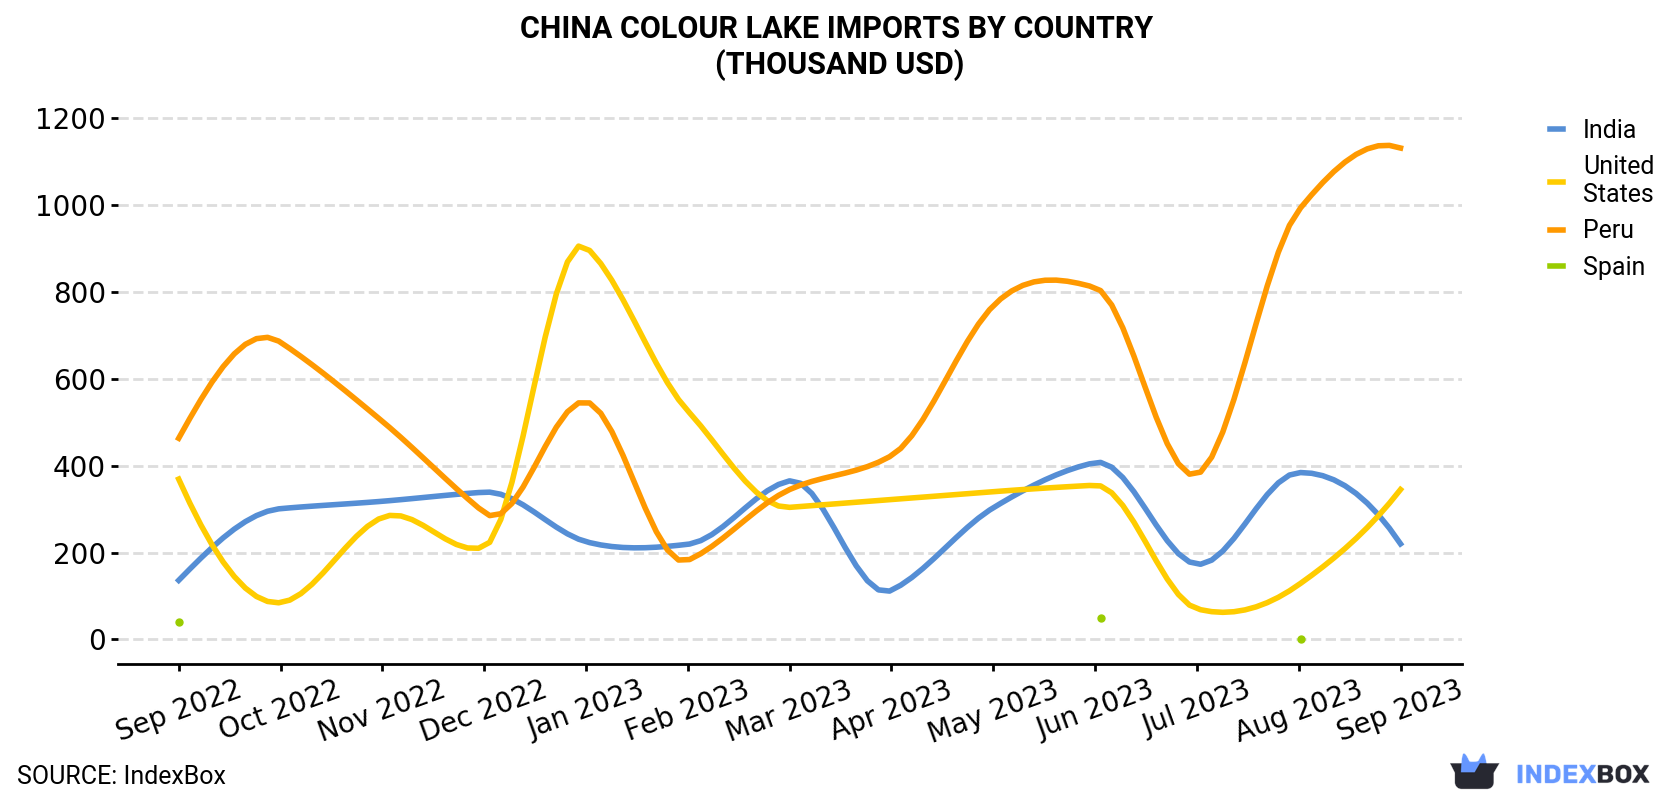 China Colour Lake Imports By Country (Thousand USD)